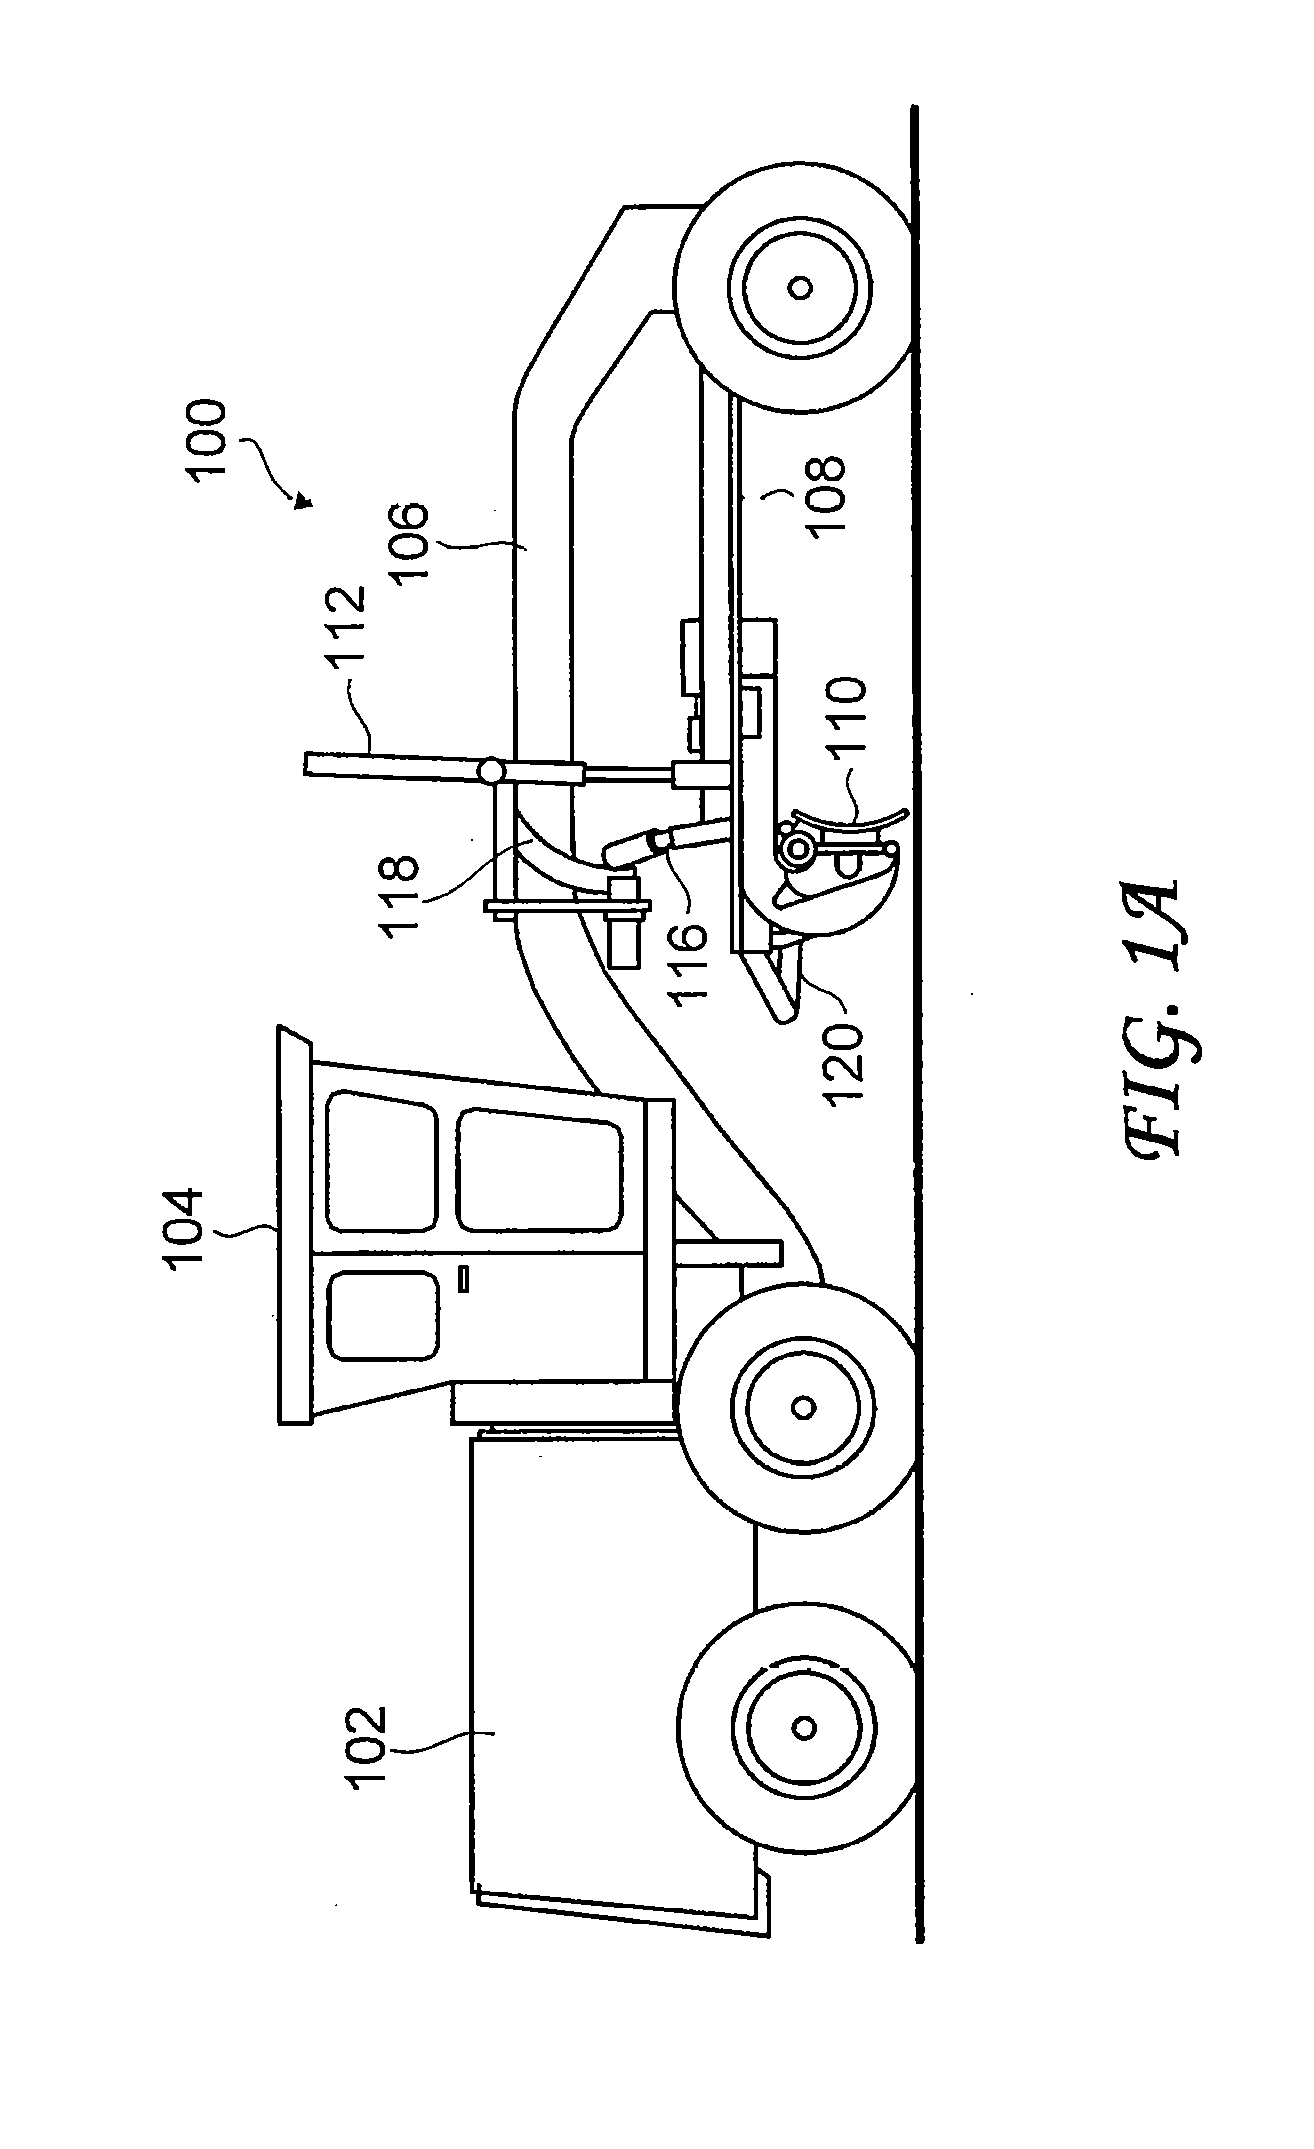 Automatic Blade Slope Control System